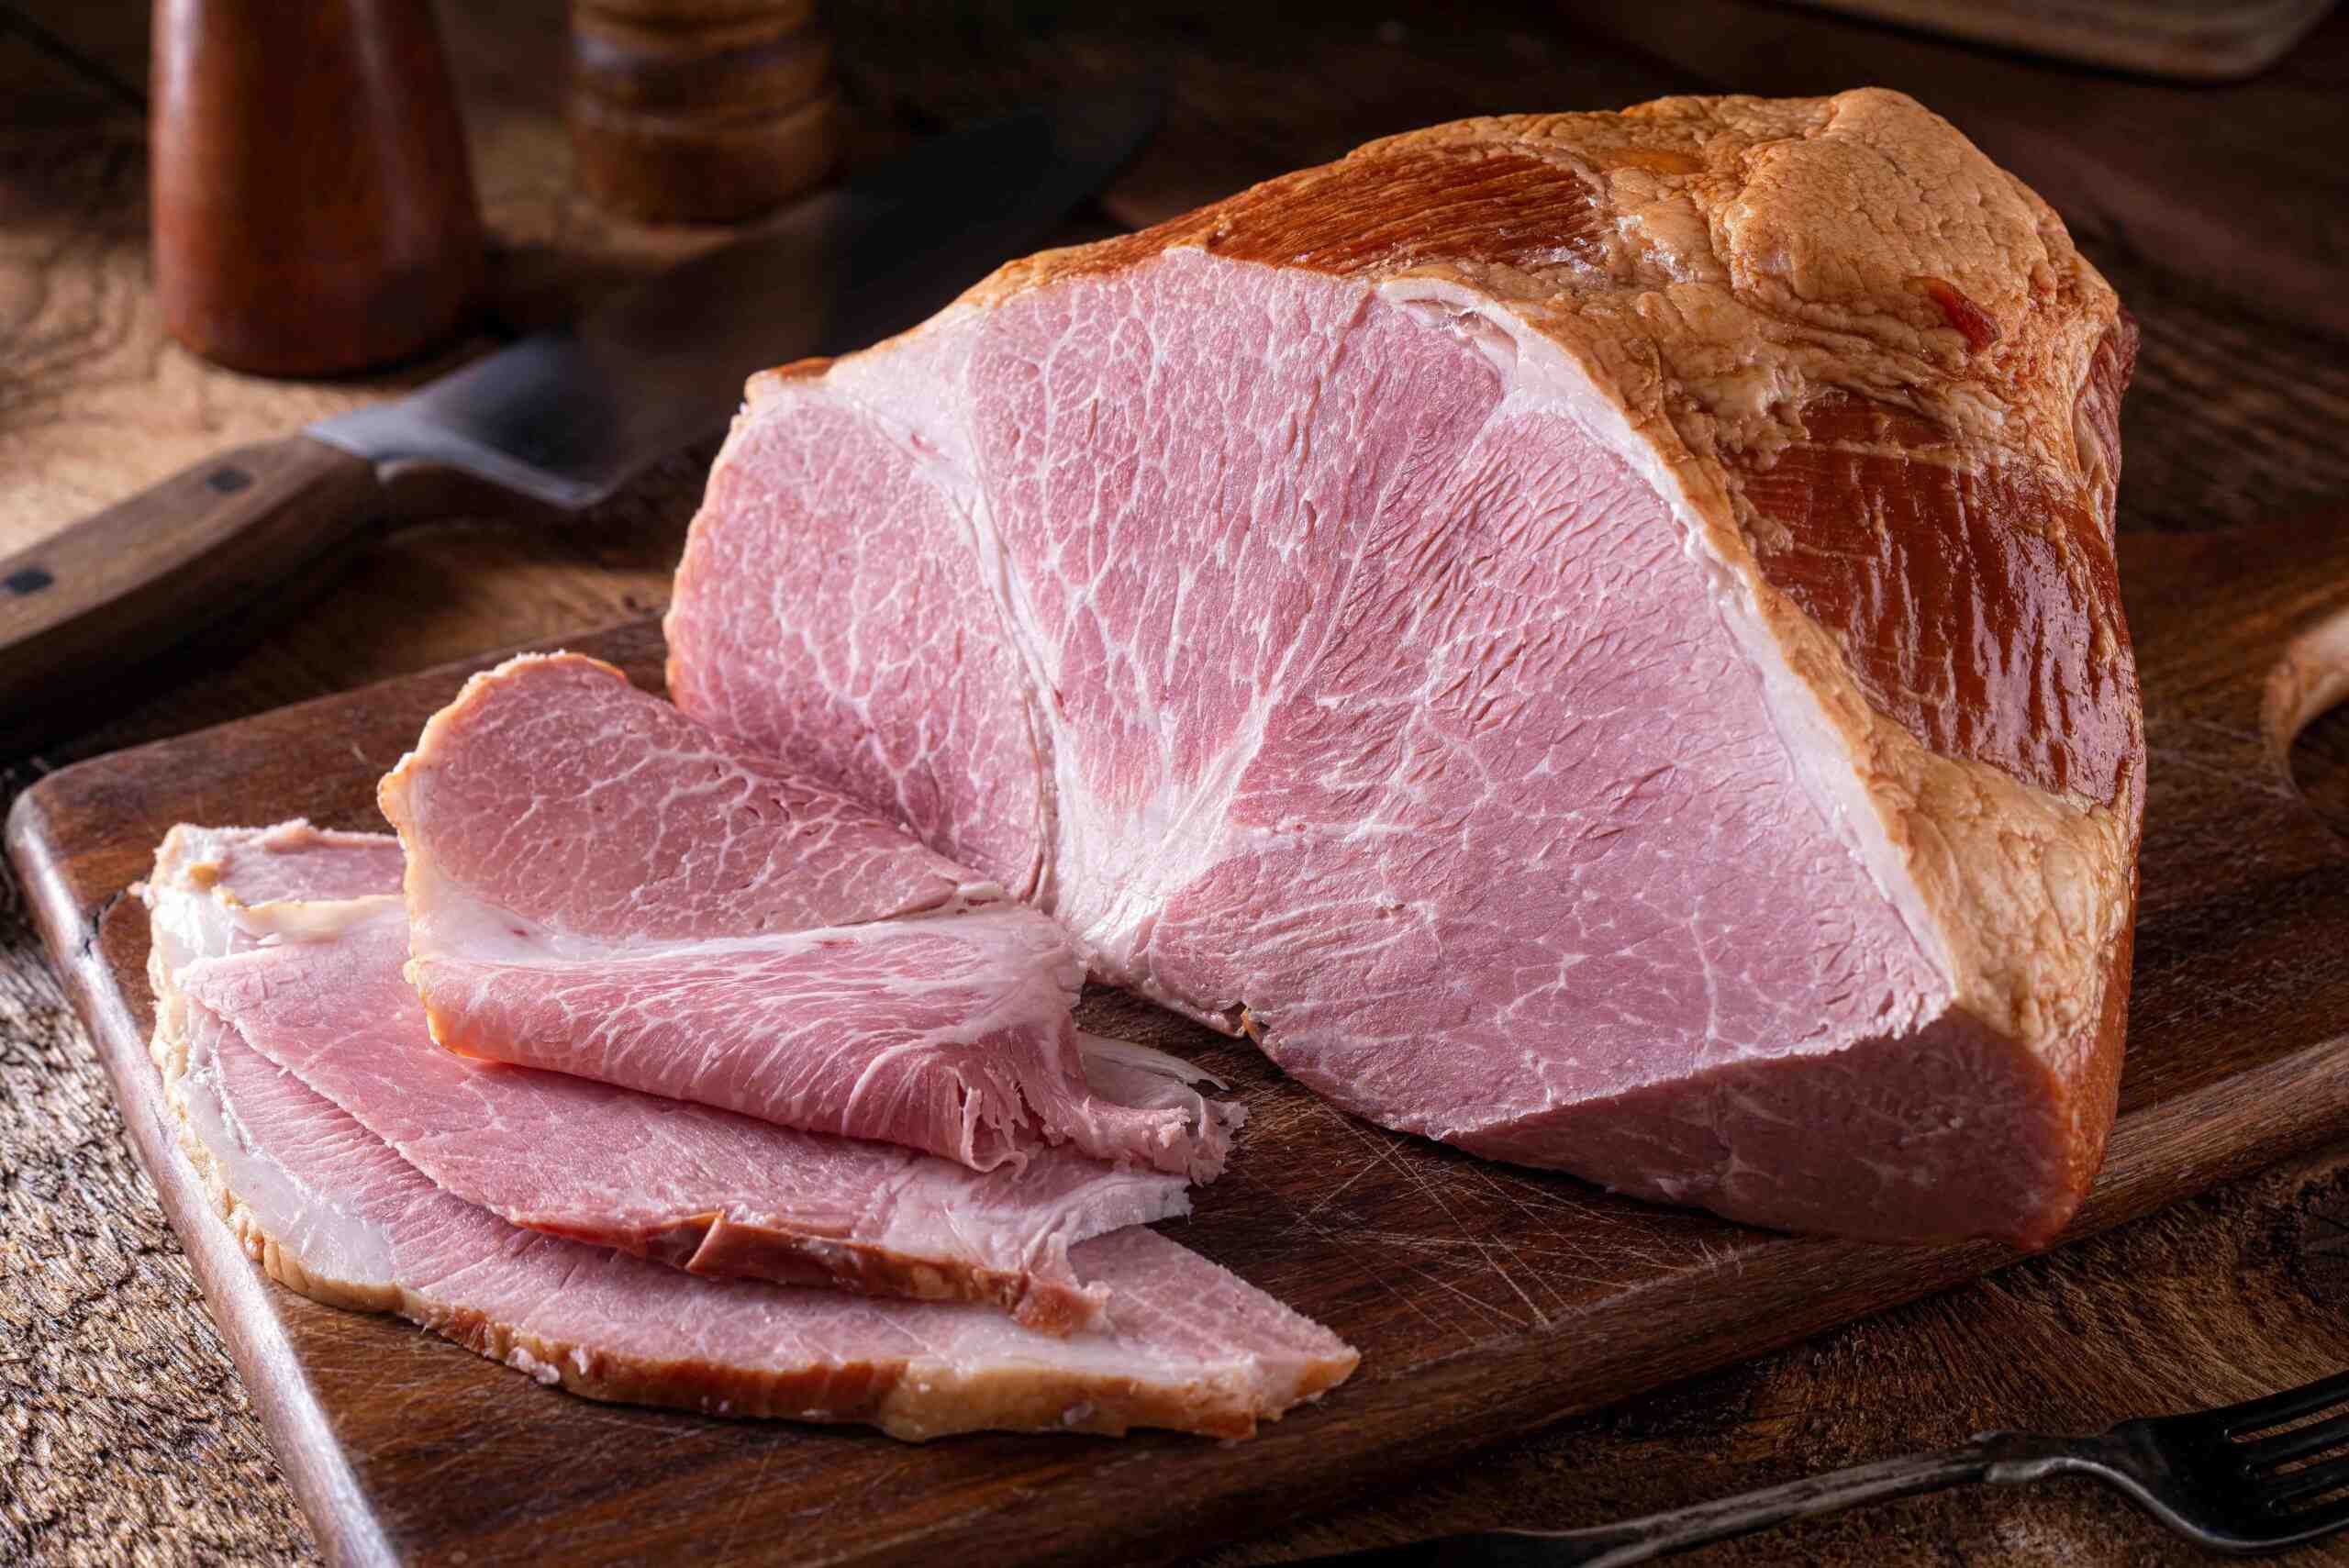 Is ham cooked or raw?